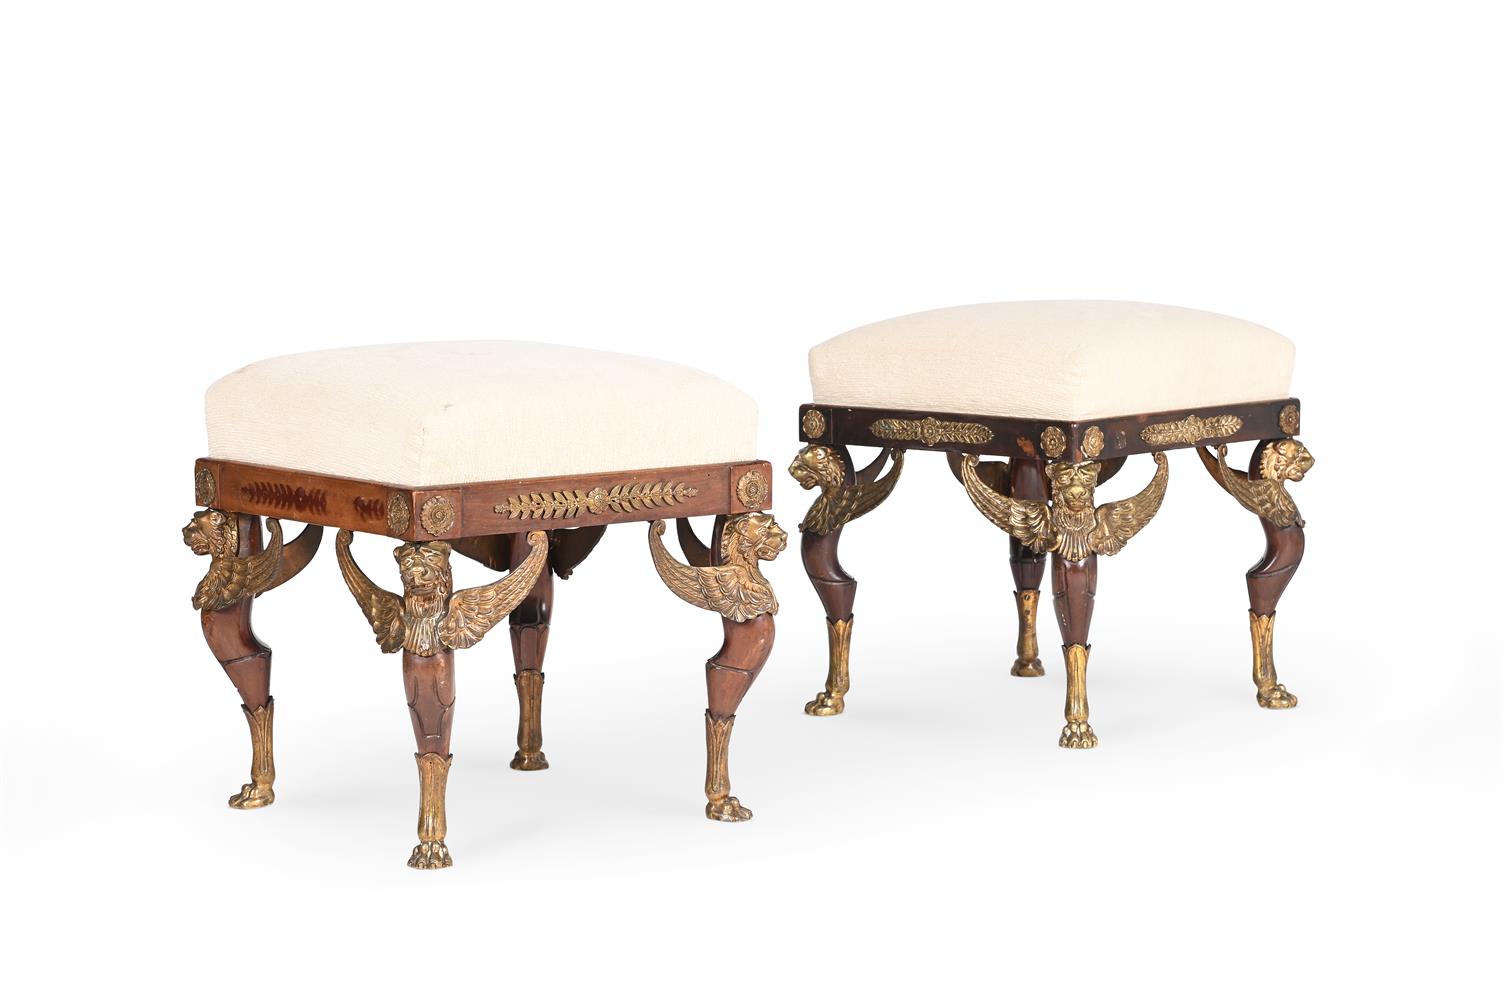 A MATCHED PAIR OF FRENCH MAHOGANY AND GILT METAL MOUNTED STOOLS, LATE 19TH OR EARLY 20TH CENTURY